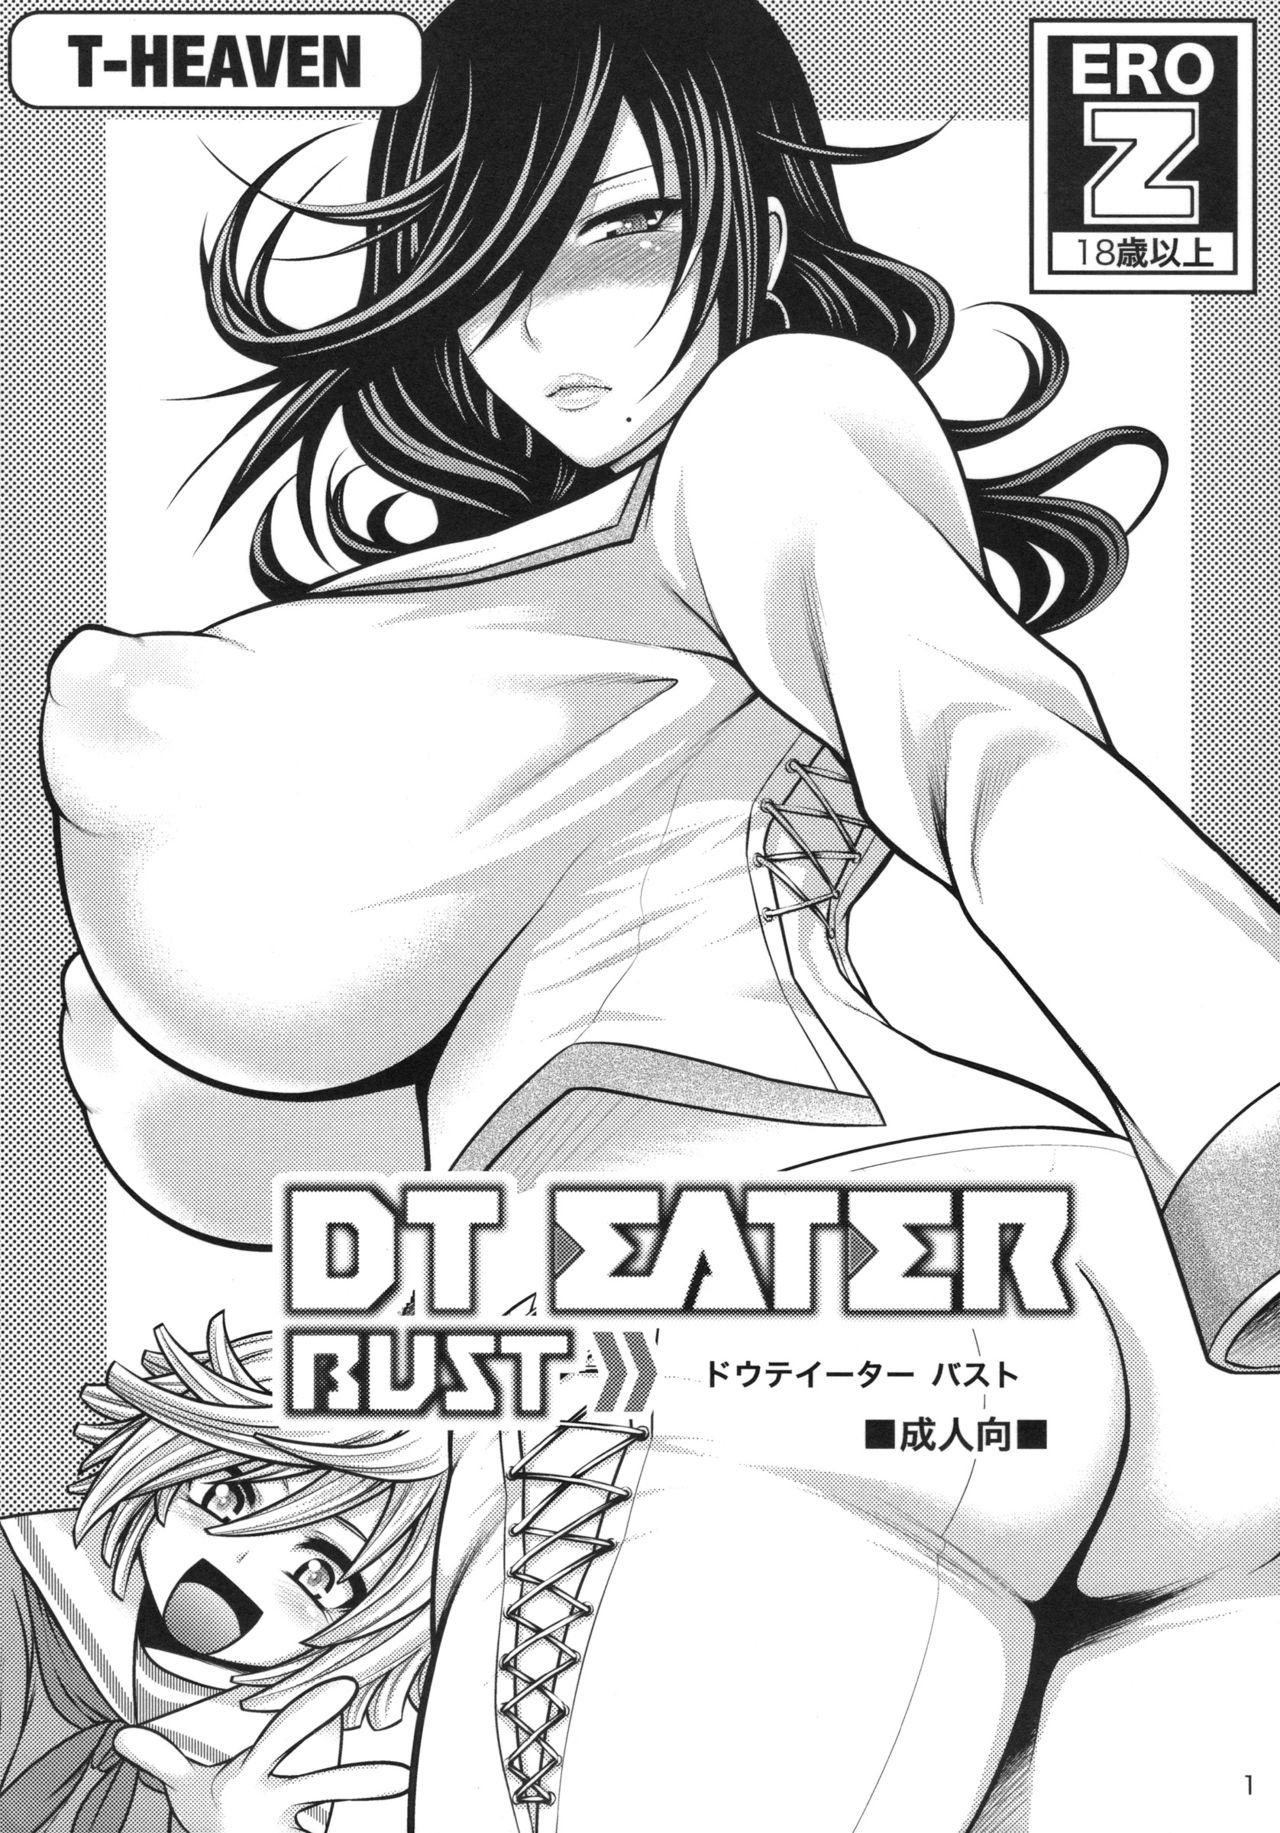 Pussy DT EATER BUST - God eater Private - Page 1